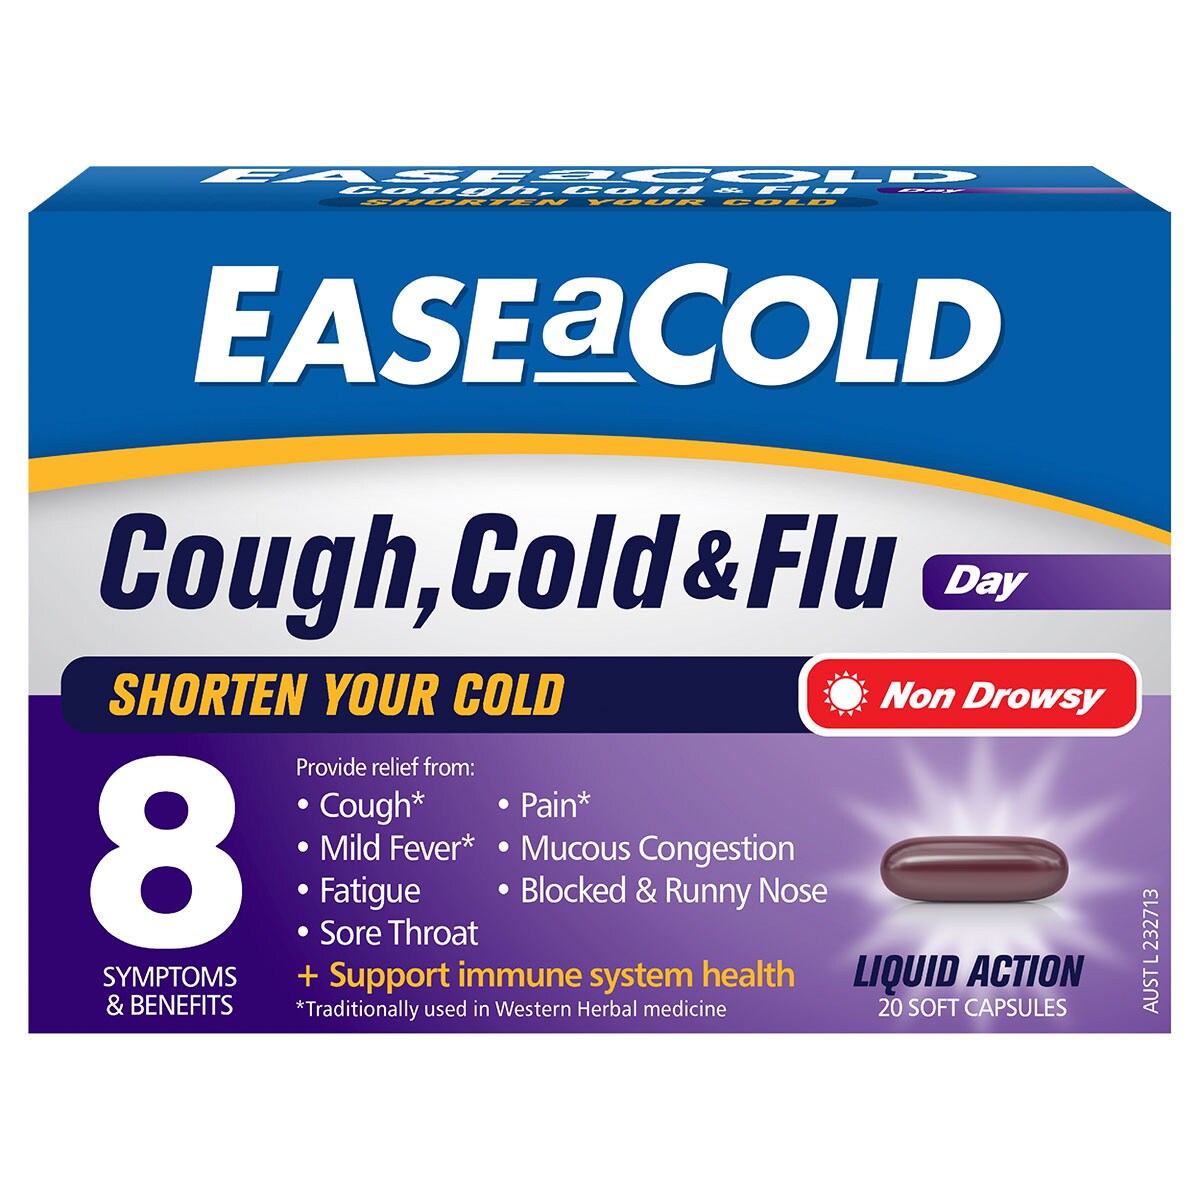 Easeacold Cough Cold & Flu Day 20S